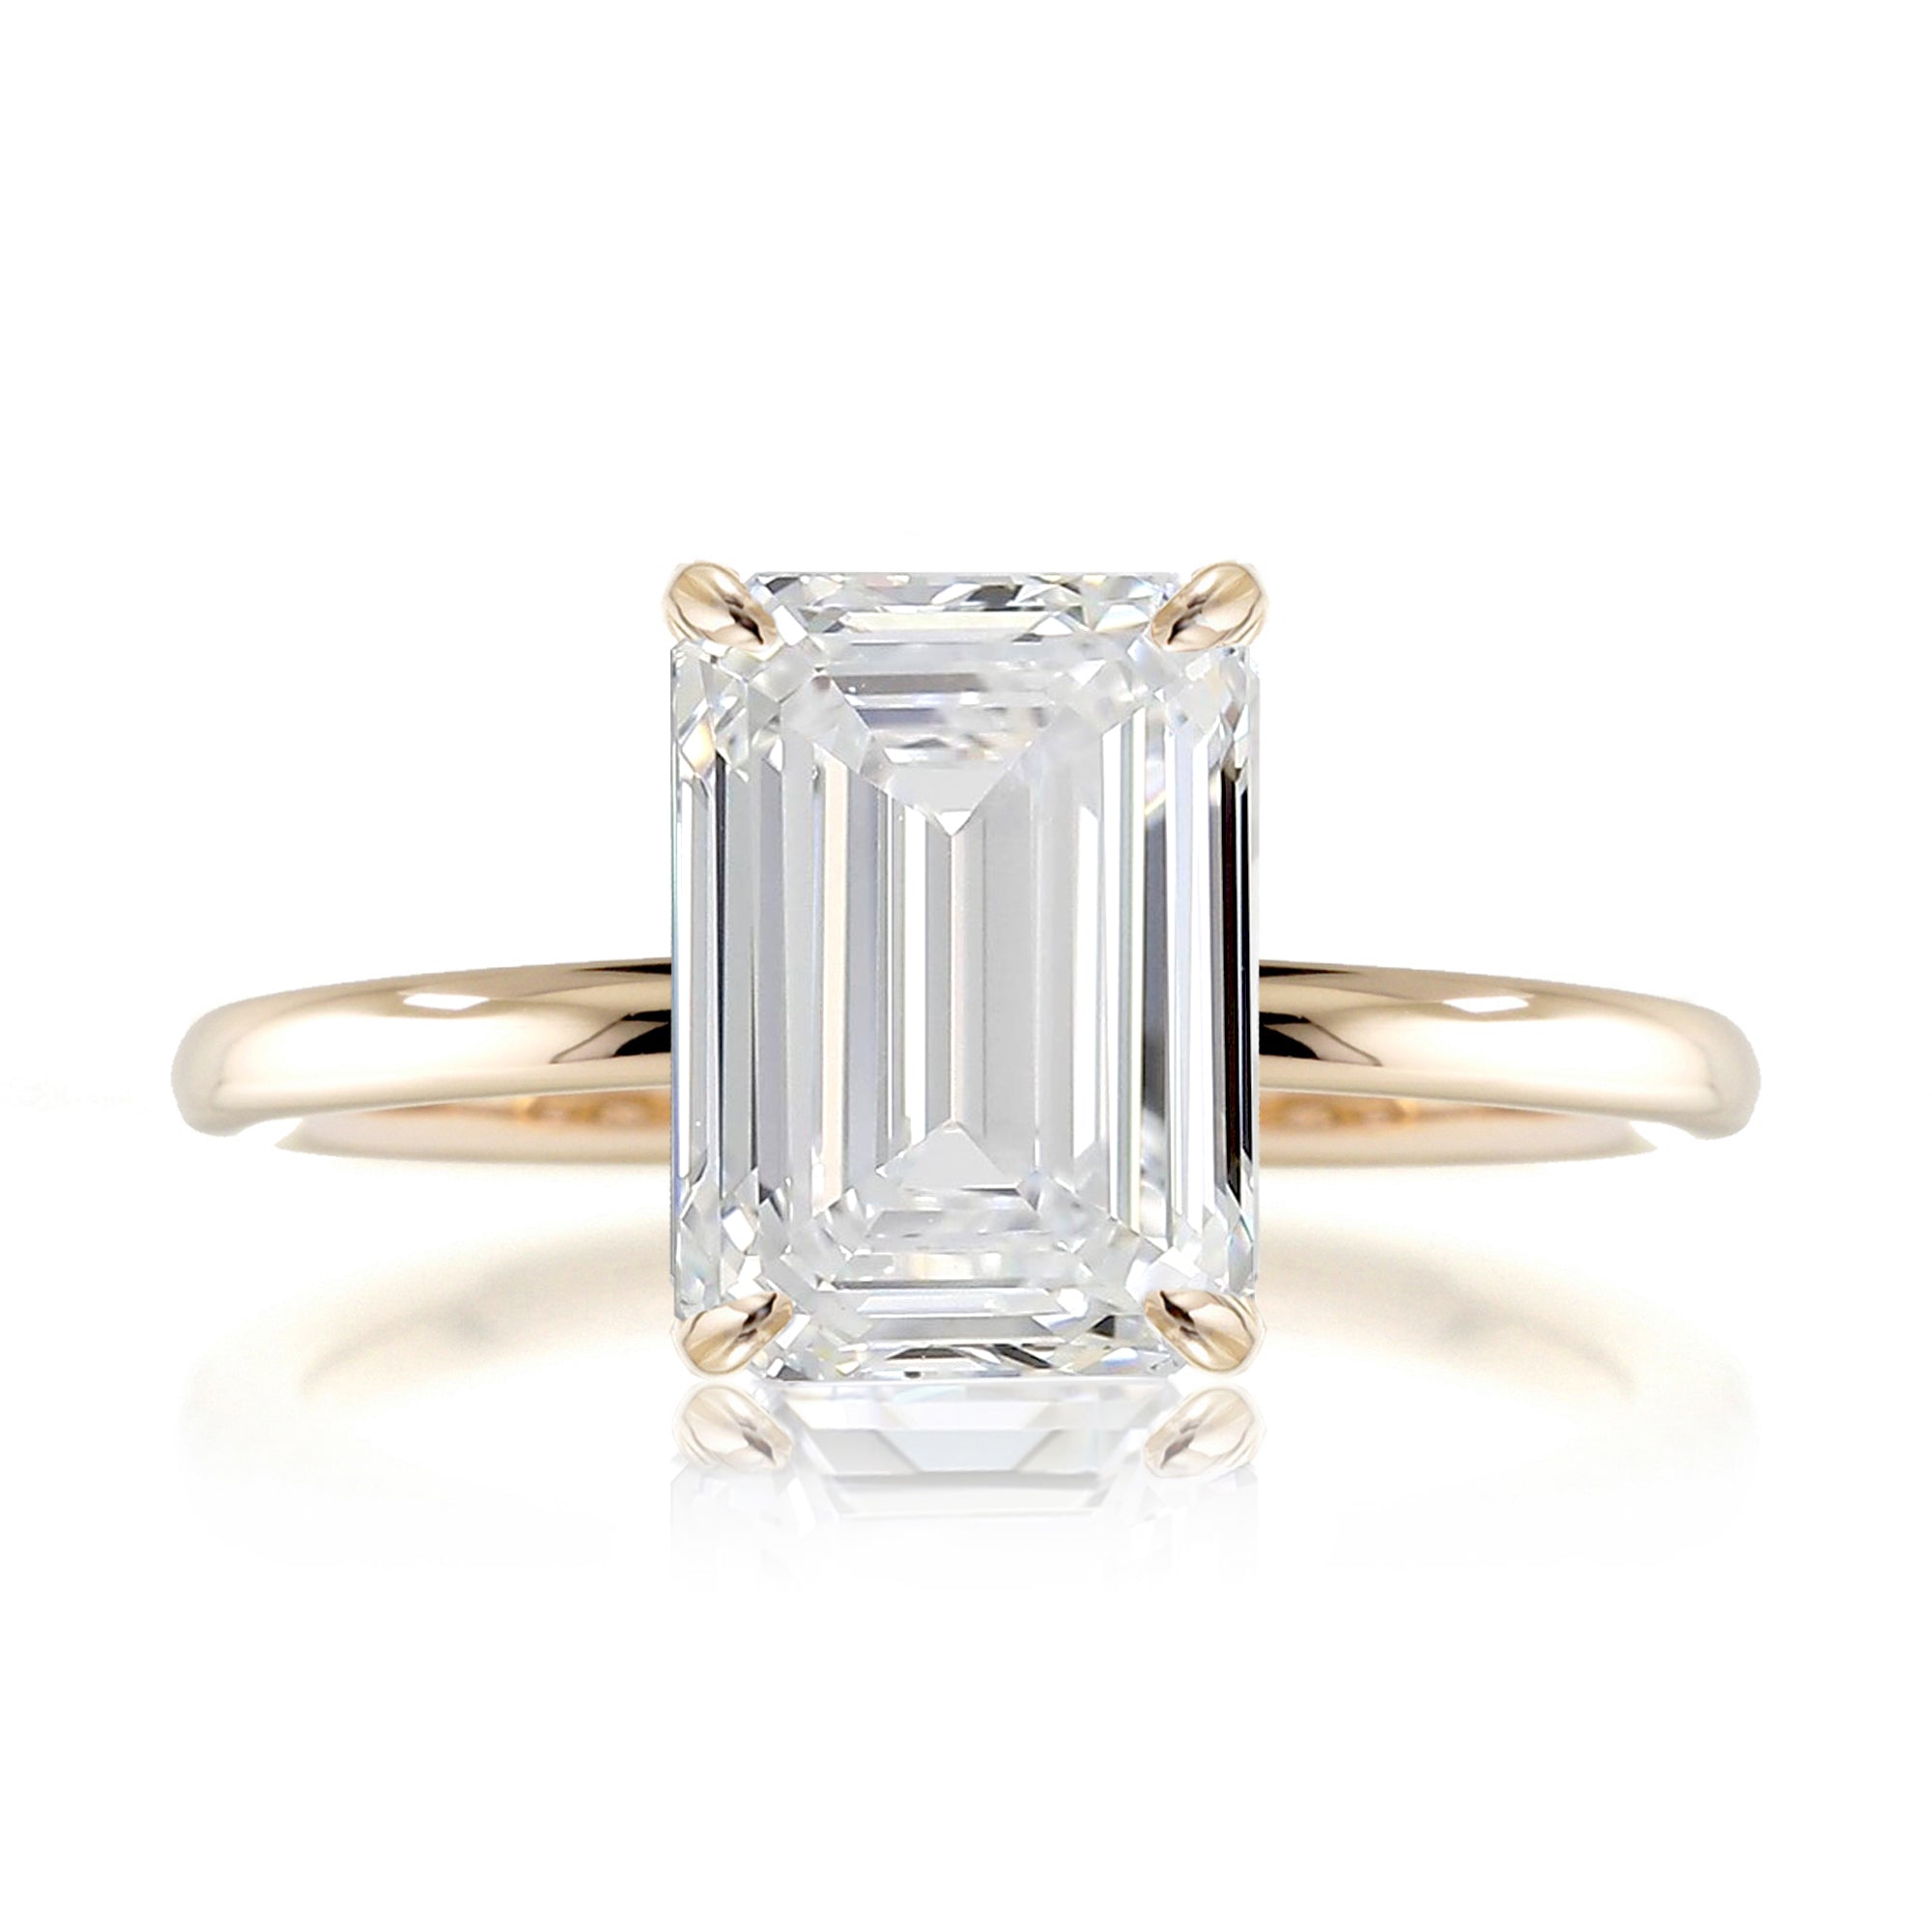 Emerald cut solid band engagement ring yellow gold - the Ava